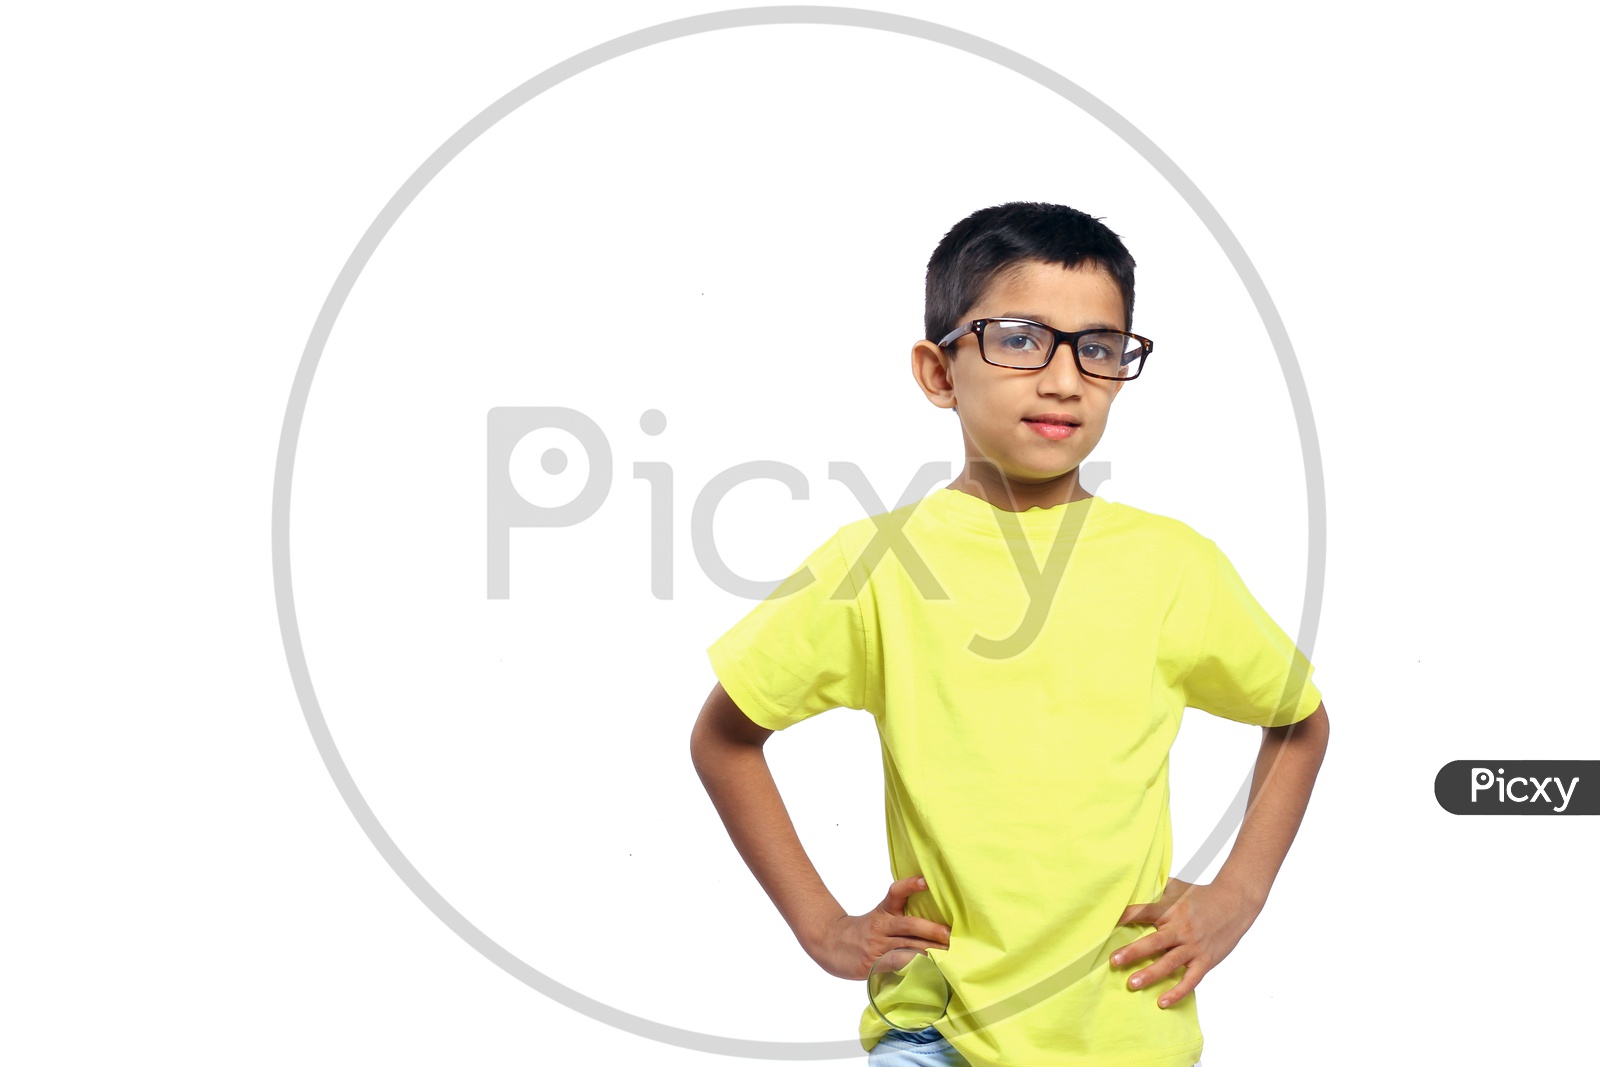 Indian Child on Eyeglass/Spects/Spectacles